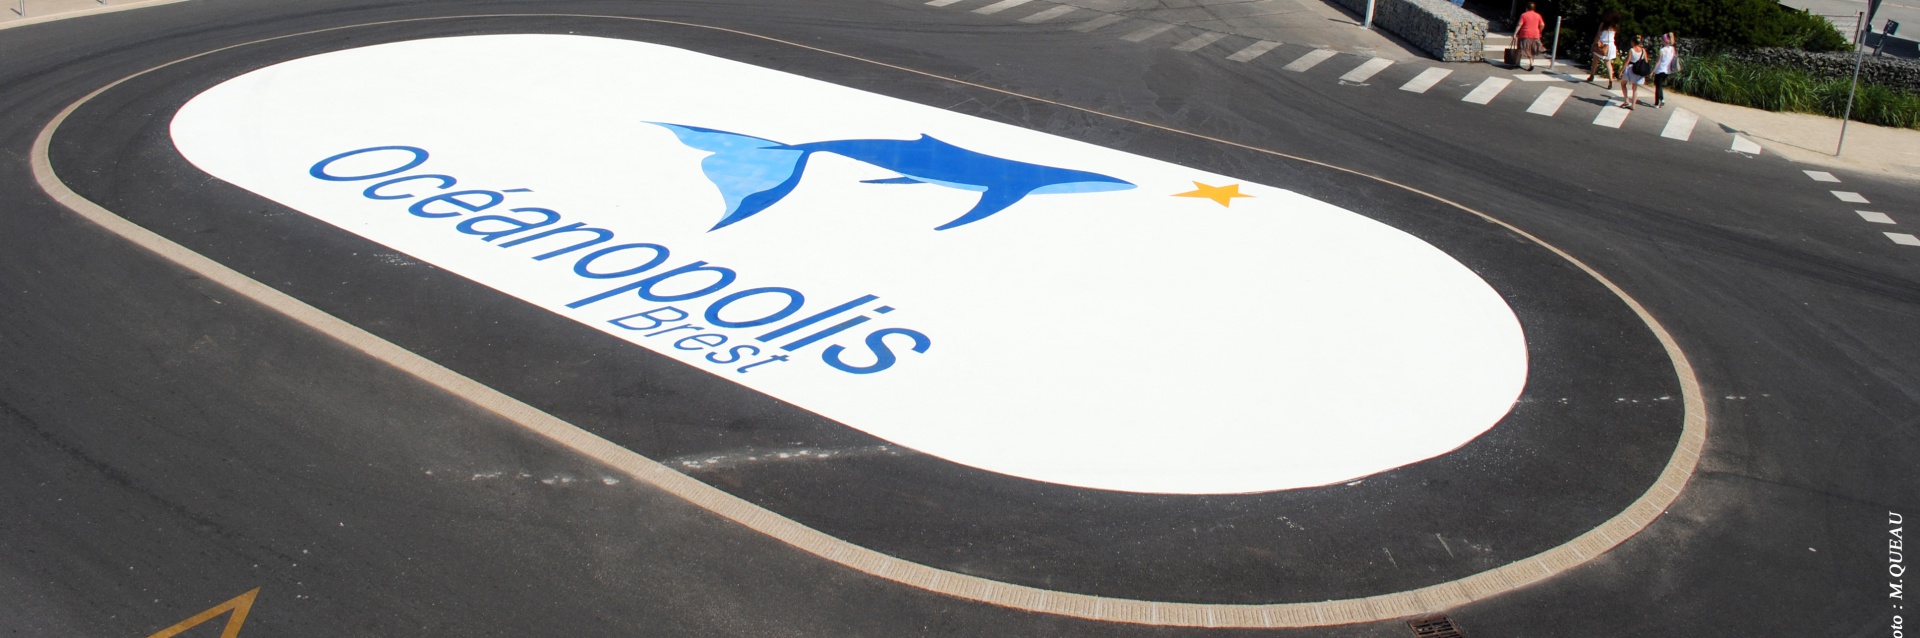 a very big surface branding as a roundabout